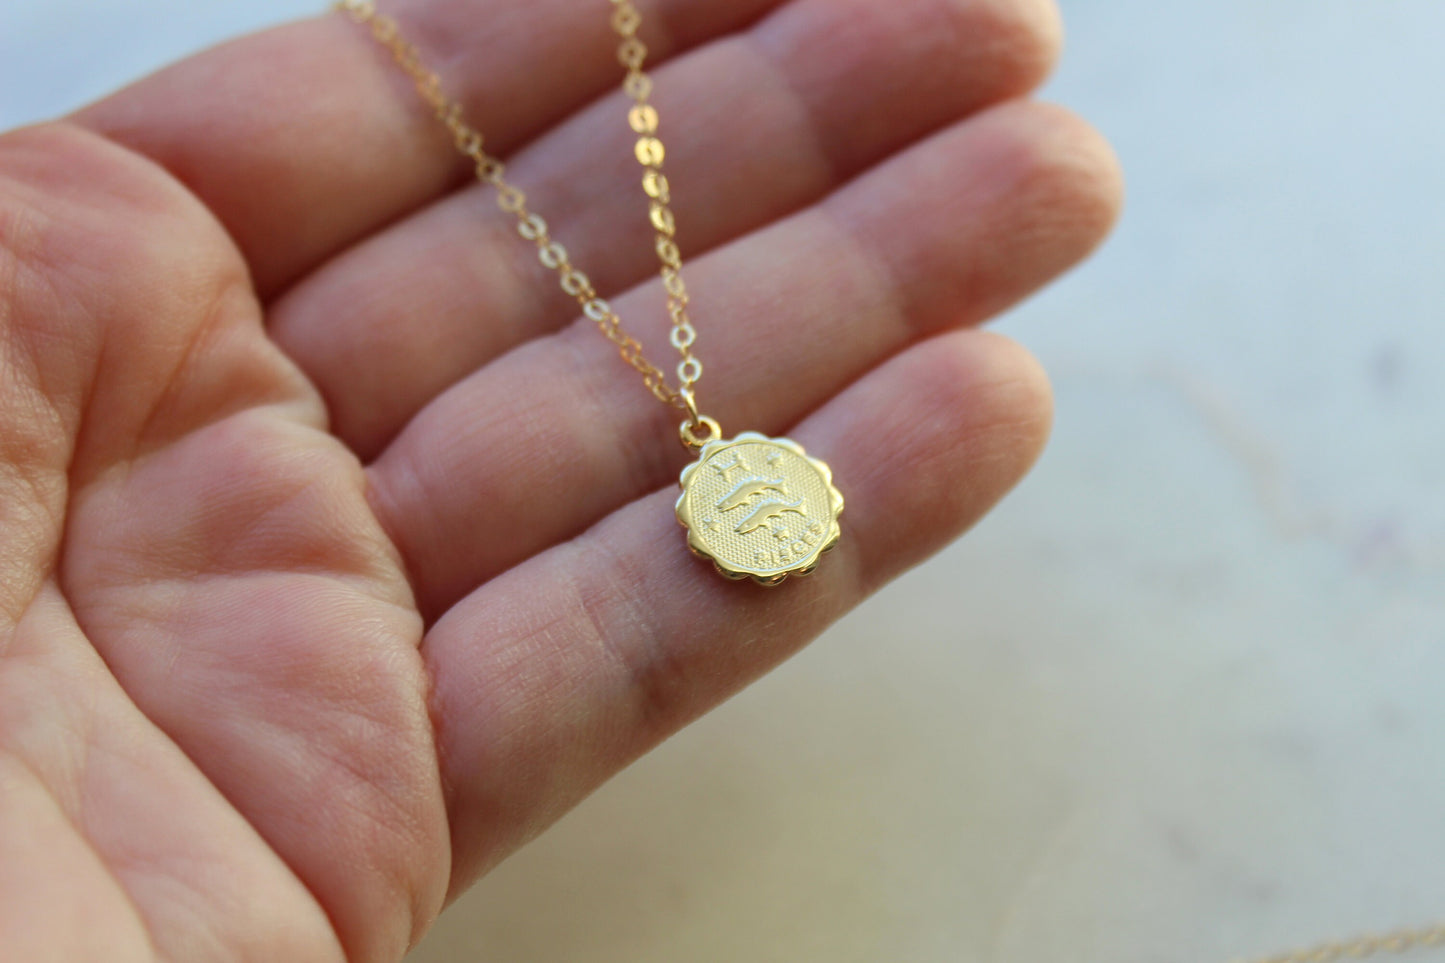 Pisces, Pisces Necklace, Gold Pisces Jewelry, Pisces Coin Necklace, Pisces Zodiac Necklace, Pisces Celestial Jewelry, Pisces Gift, Astrology